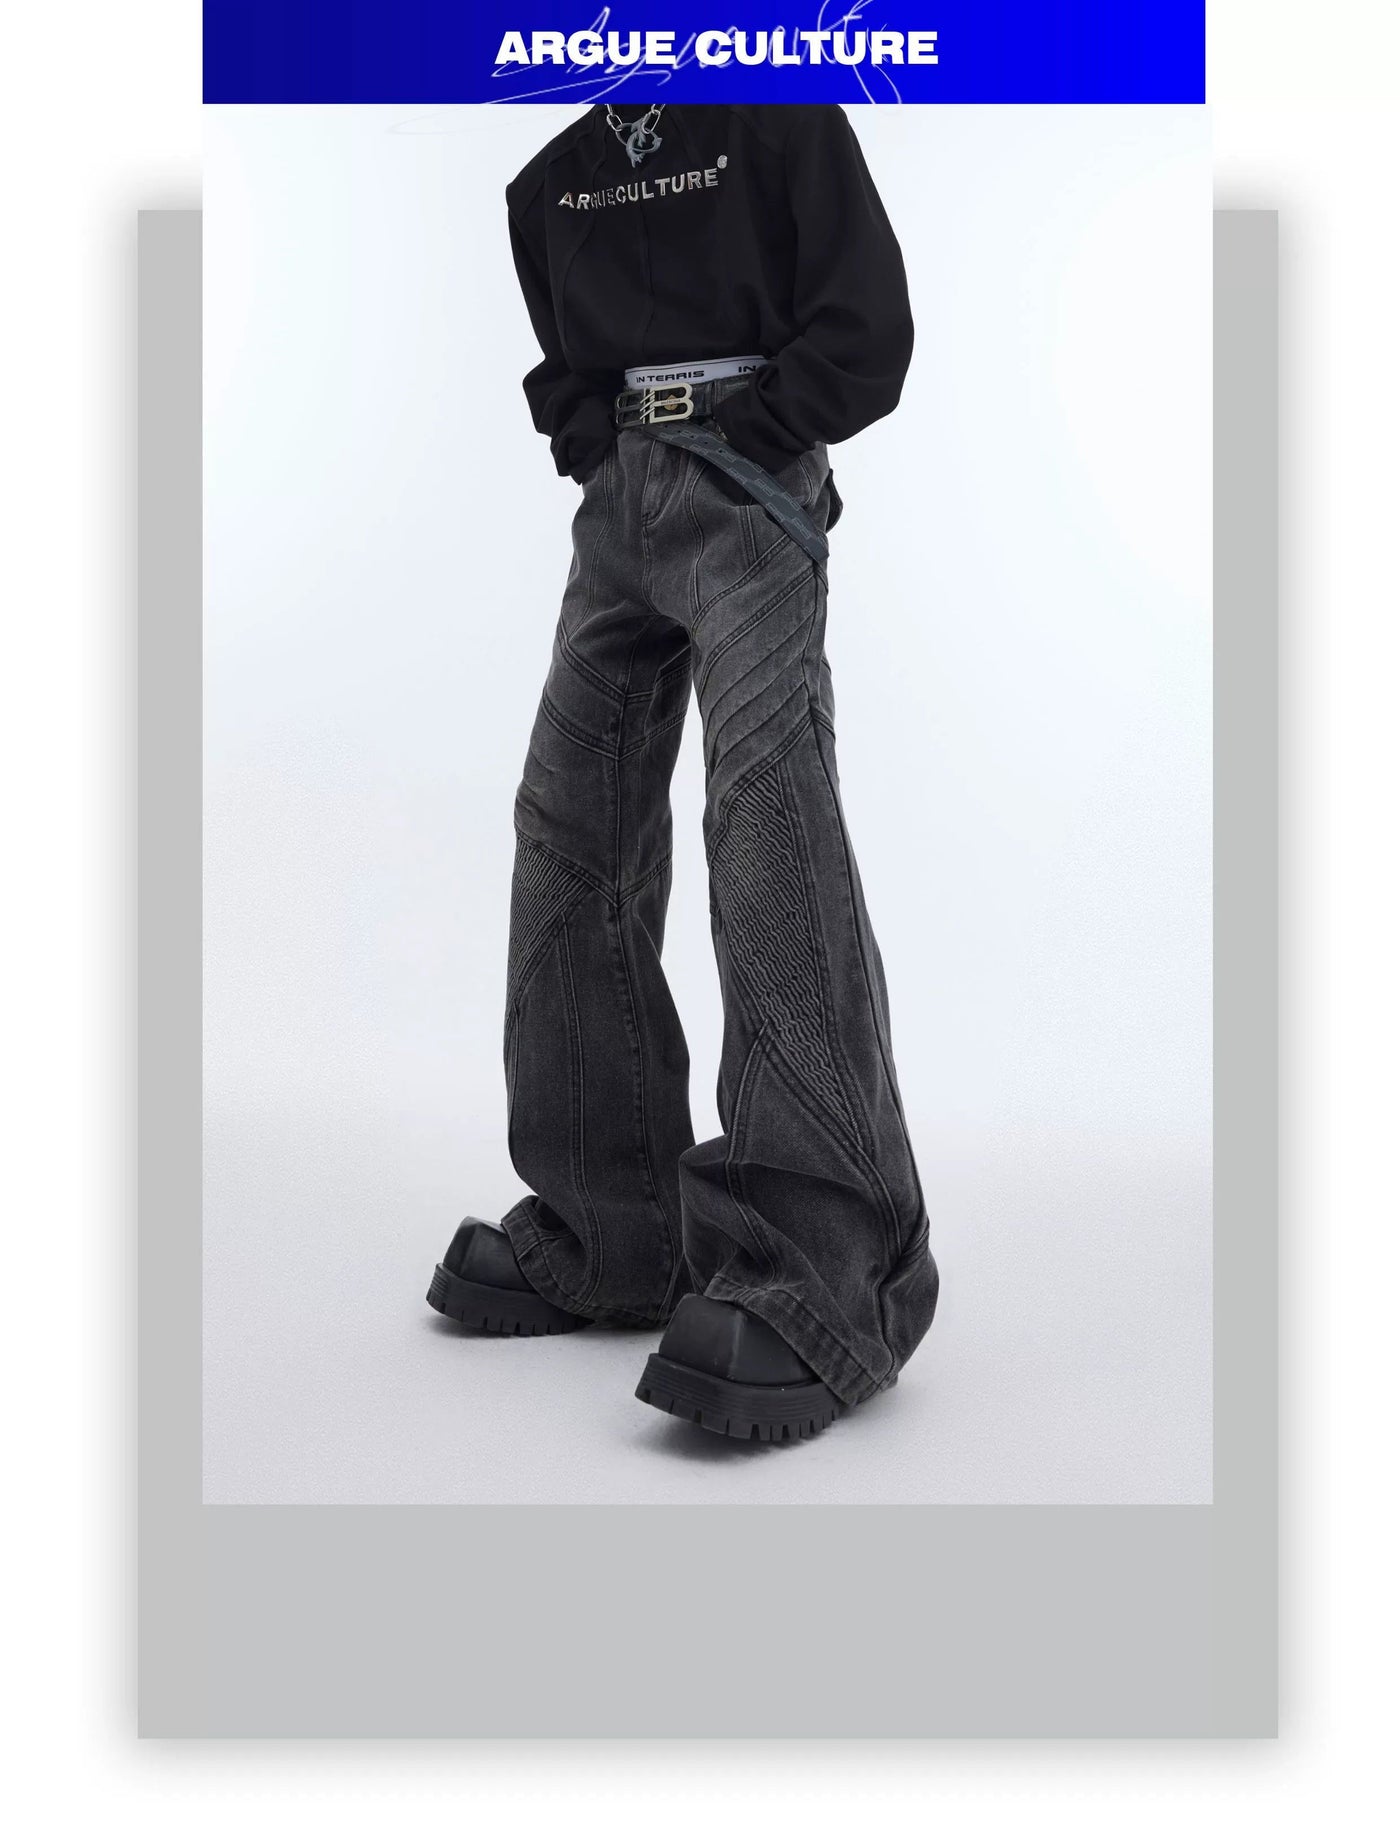 Line Textured Washed Jeans Korean Street Fashion Jeans By Argue Culture Shop Online at OH Vault